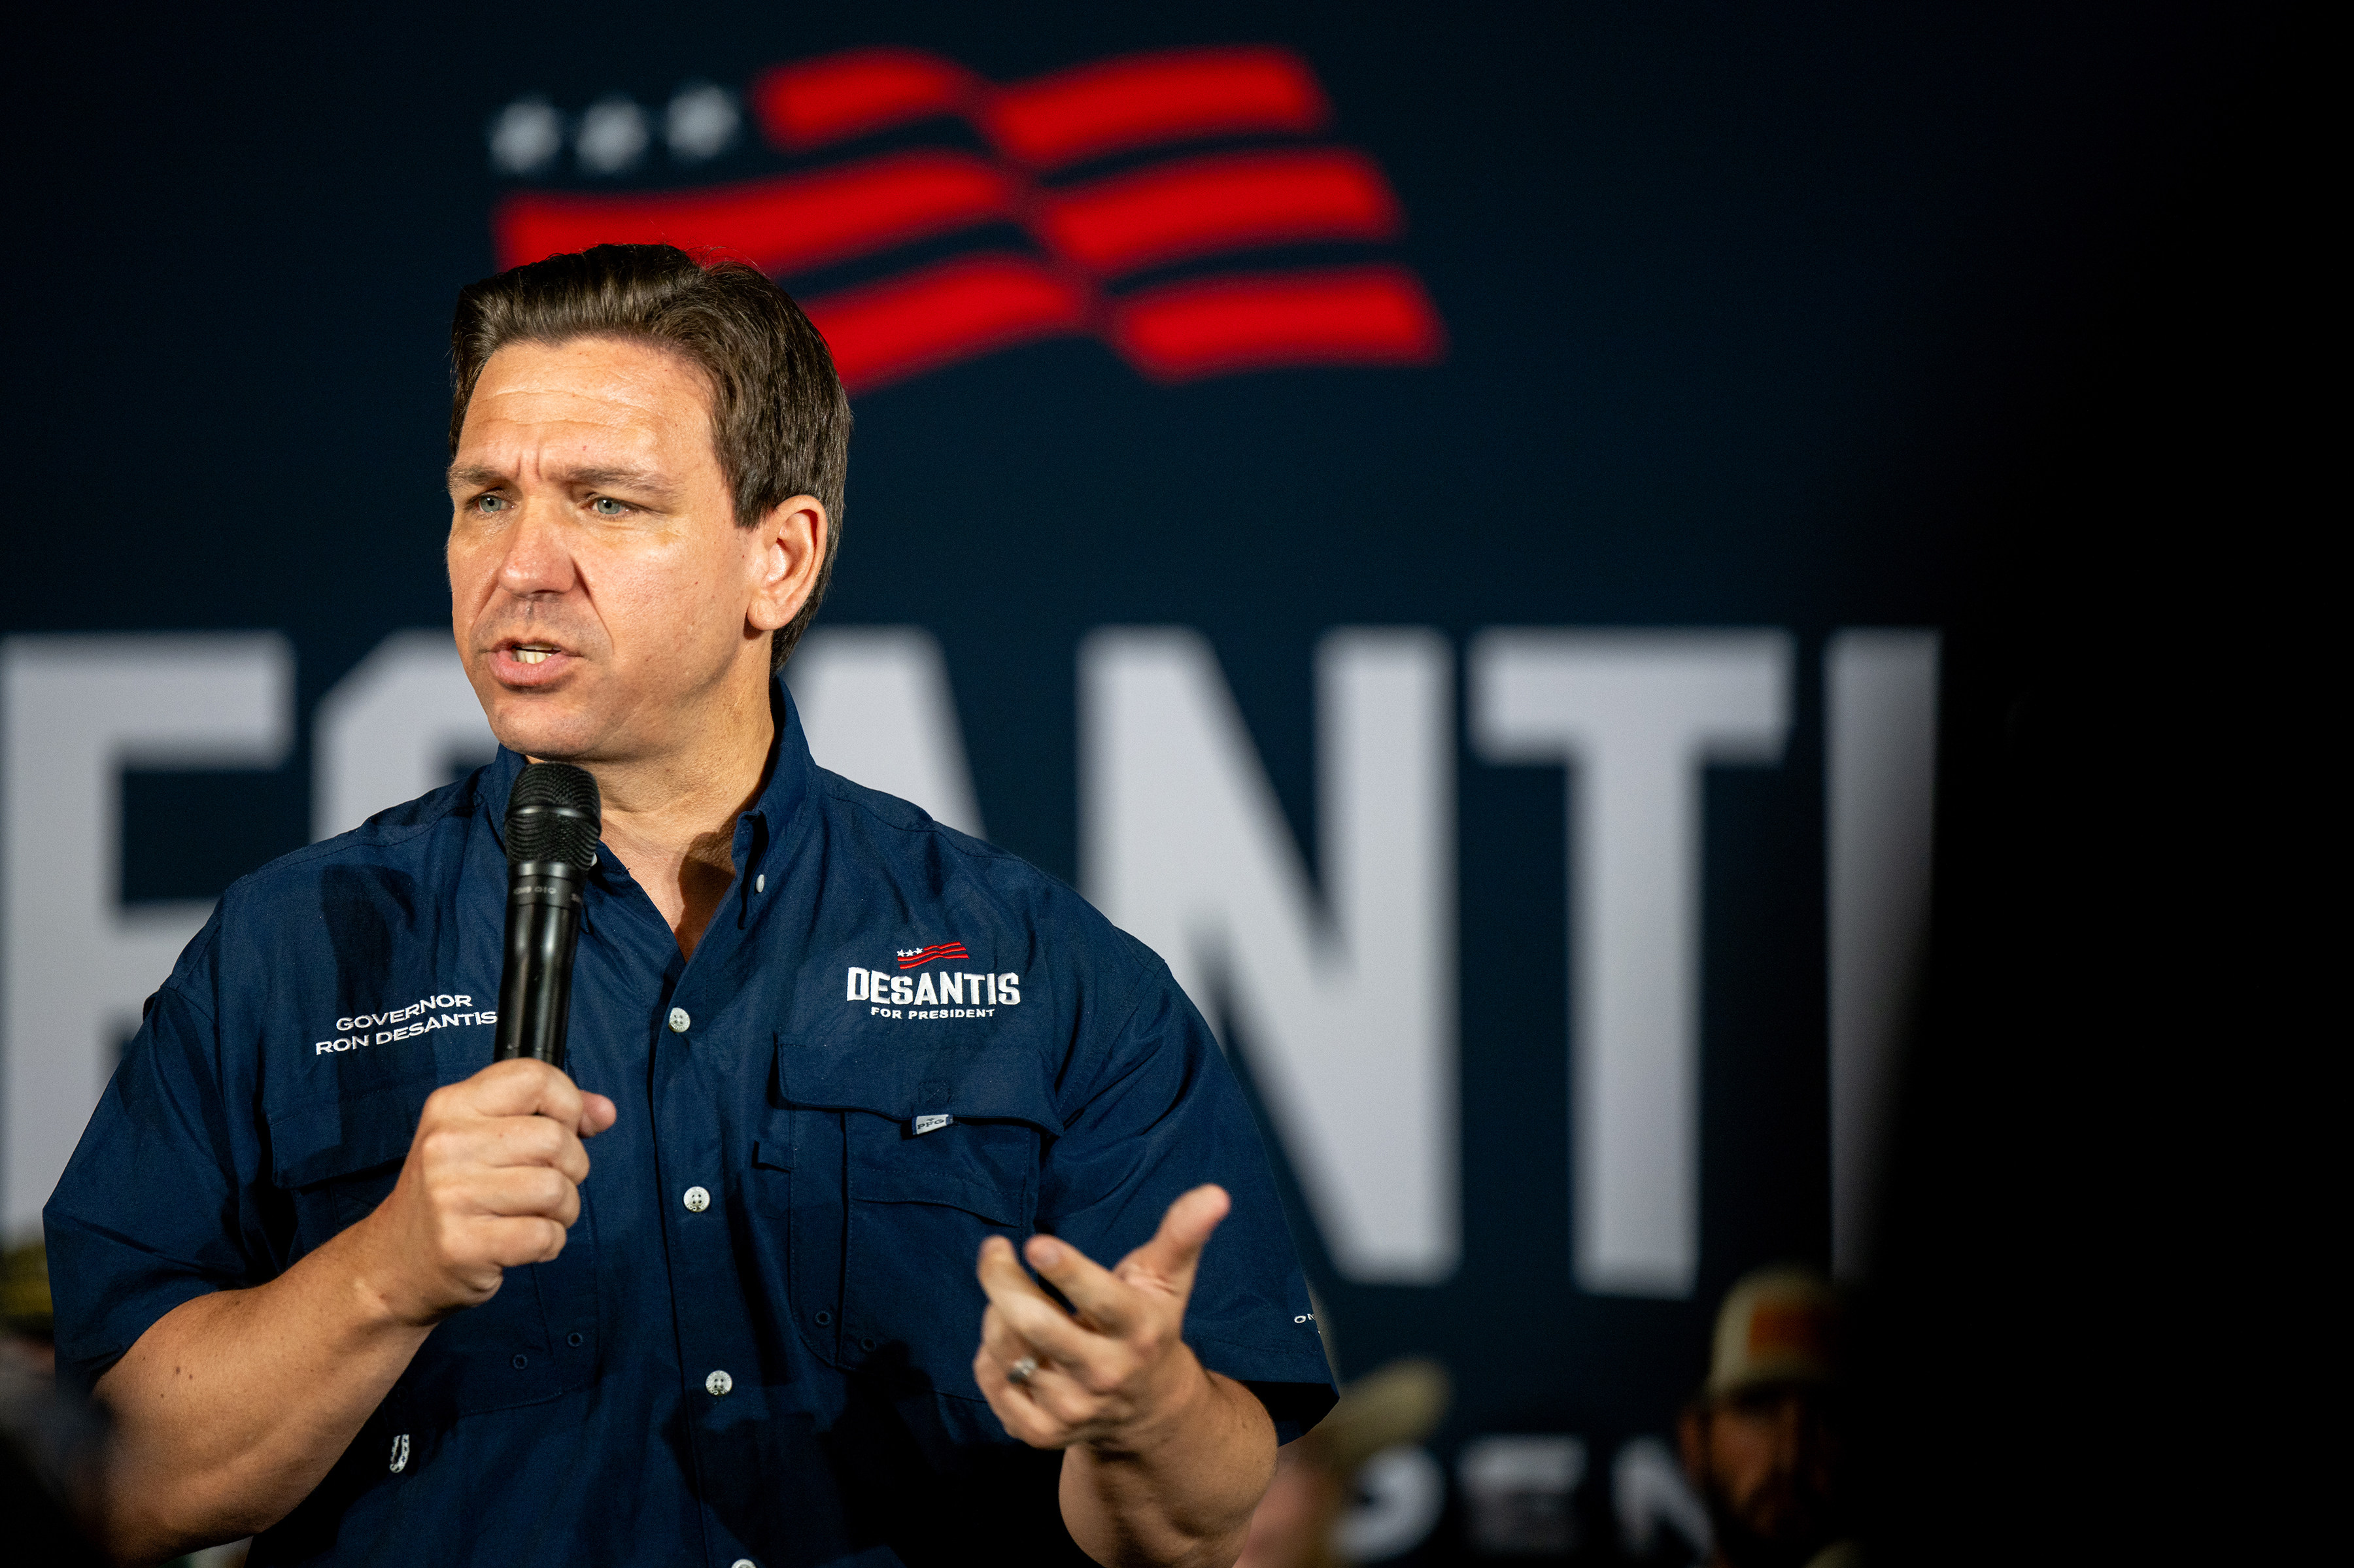 Republican presidential candidate, Florida Governor Ron DeSantis at a campaign rally in Eagle Pass, Texas on June 26. Photo: Getty Images / TNS